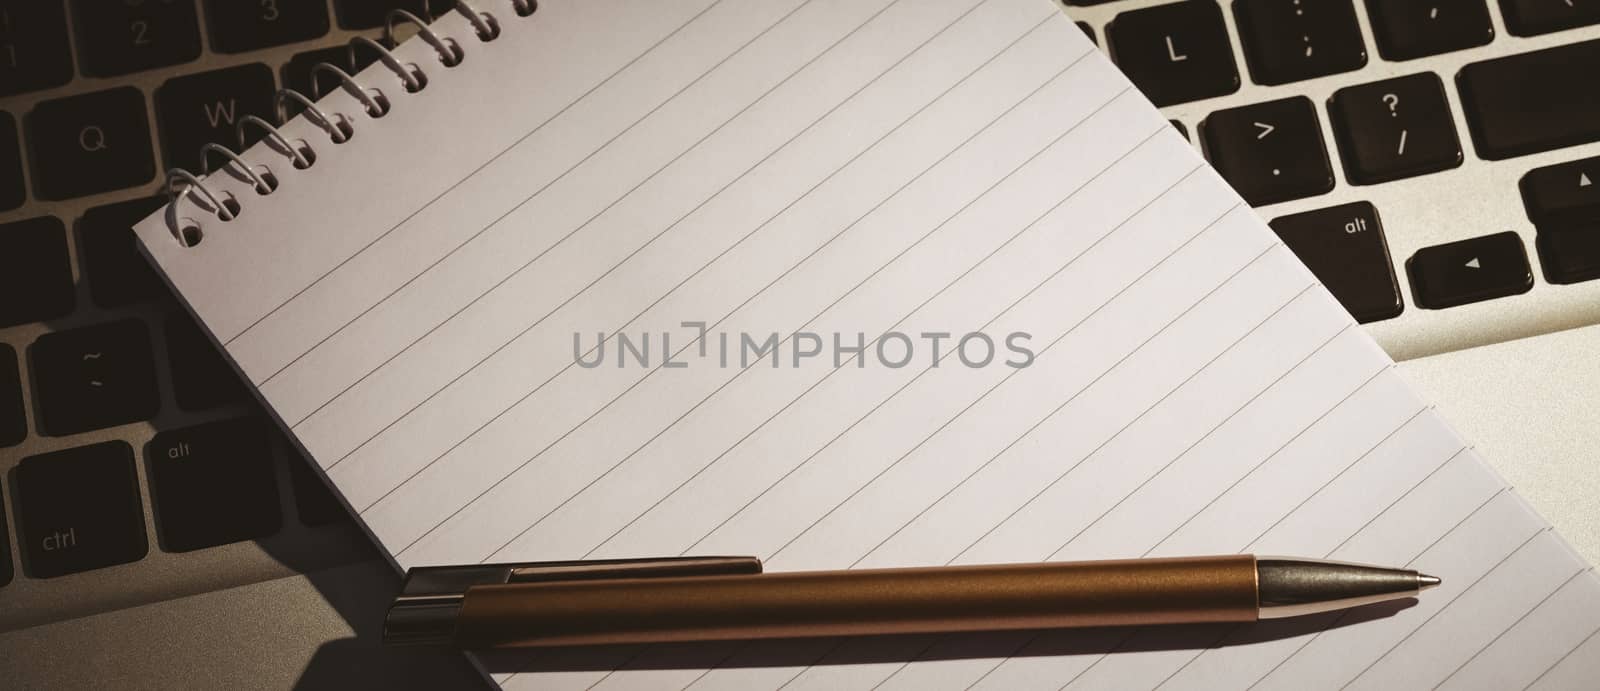 Notepad and pen on laptop by Wavebreakmedia